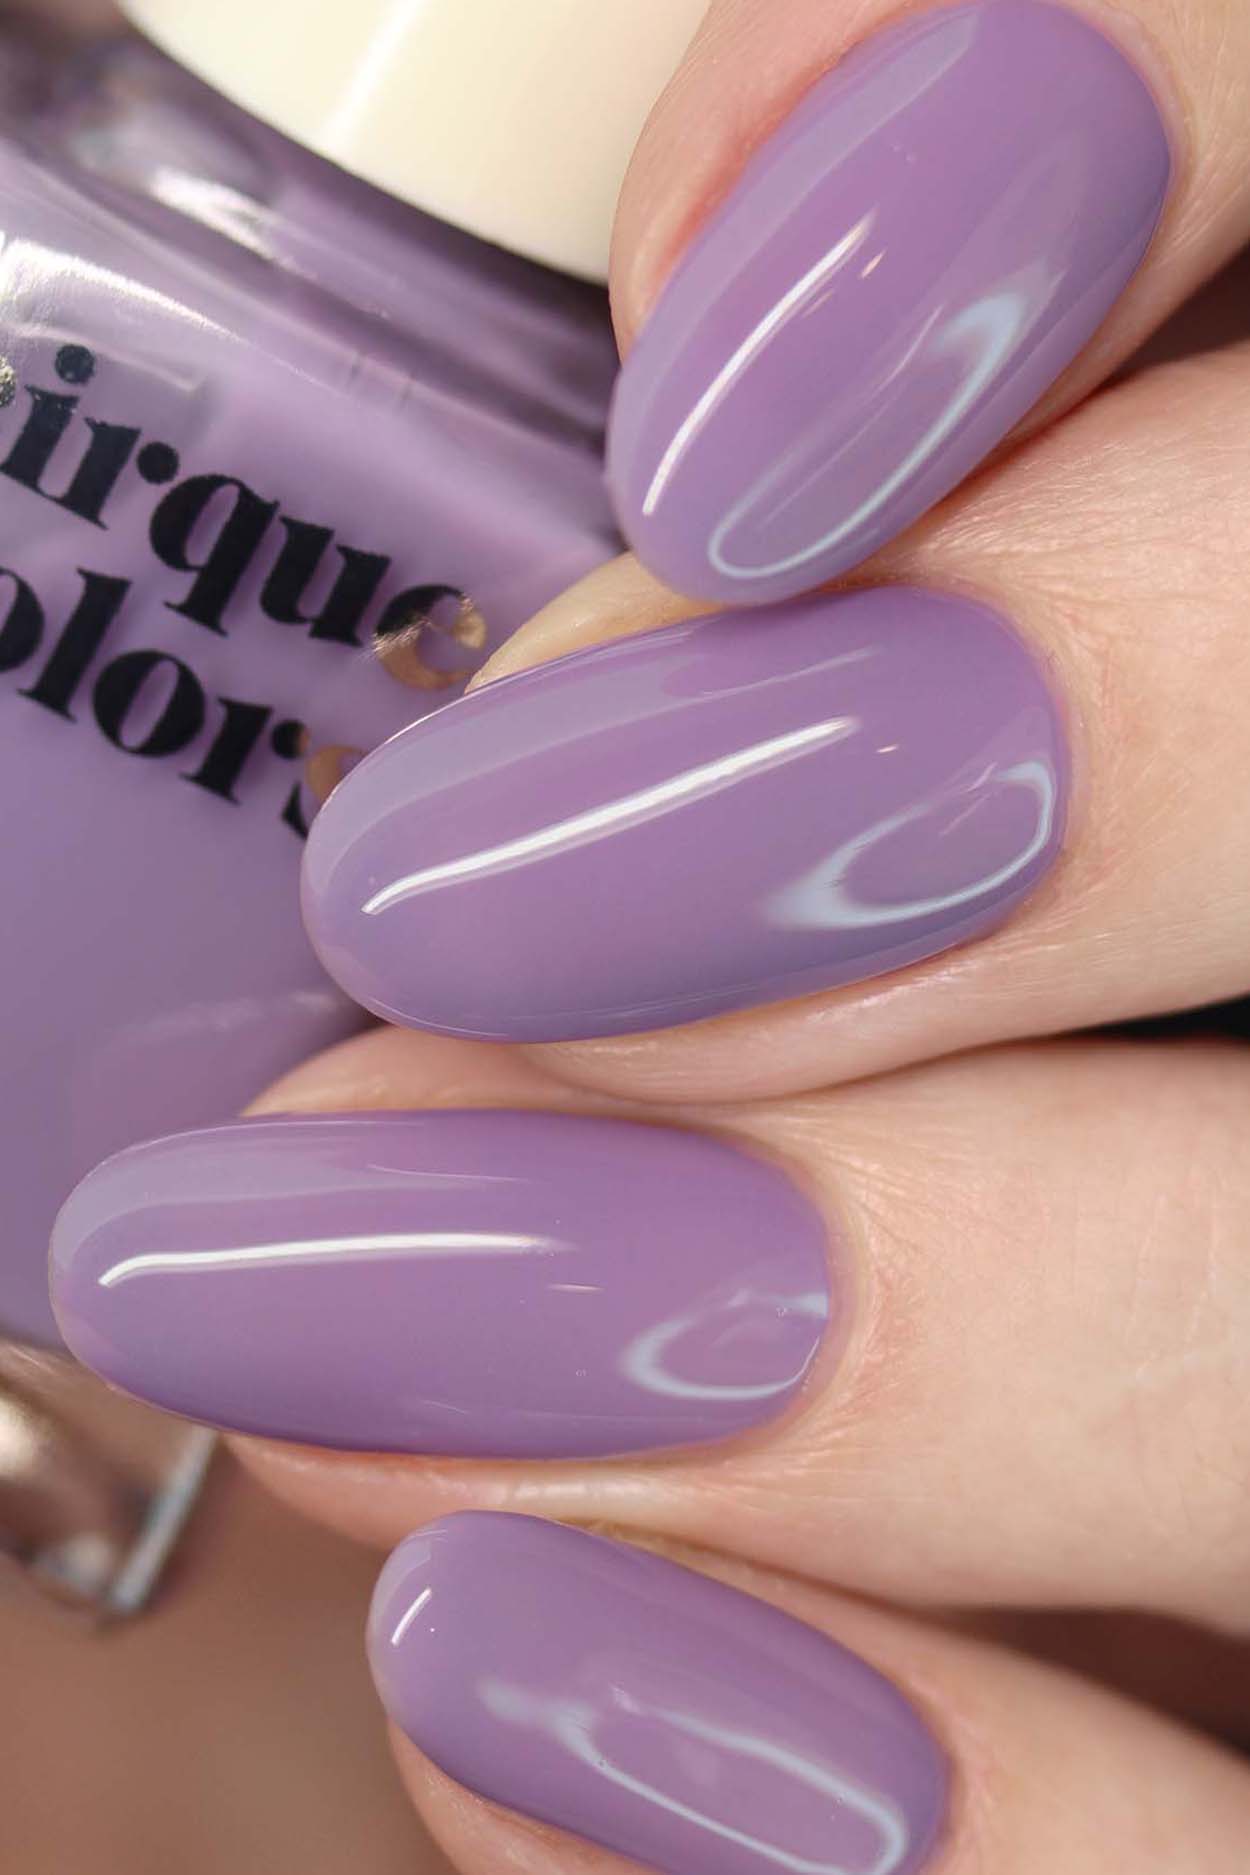 Digital Lavender Nails Are The Newest Nail Colour Trend